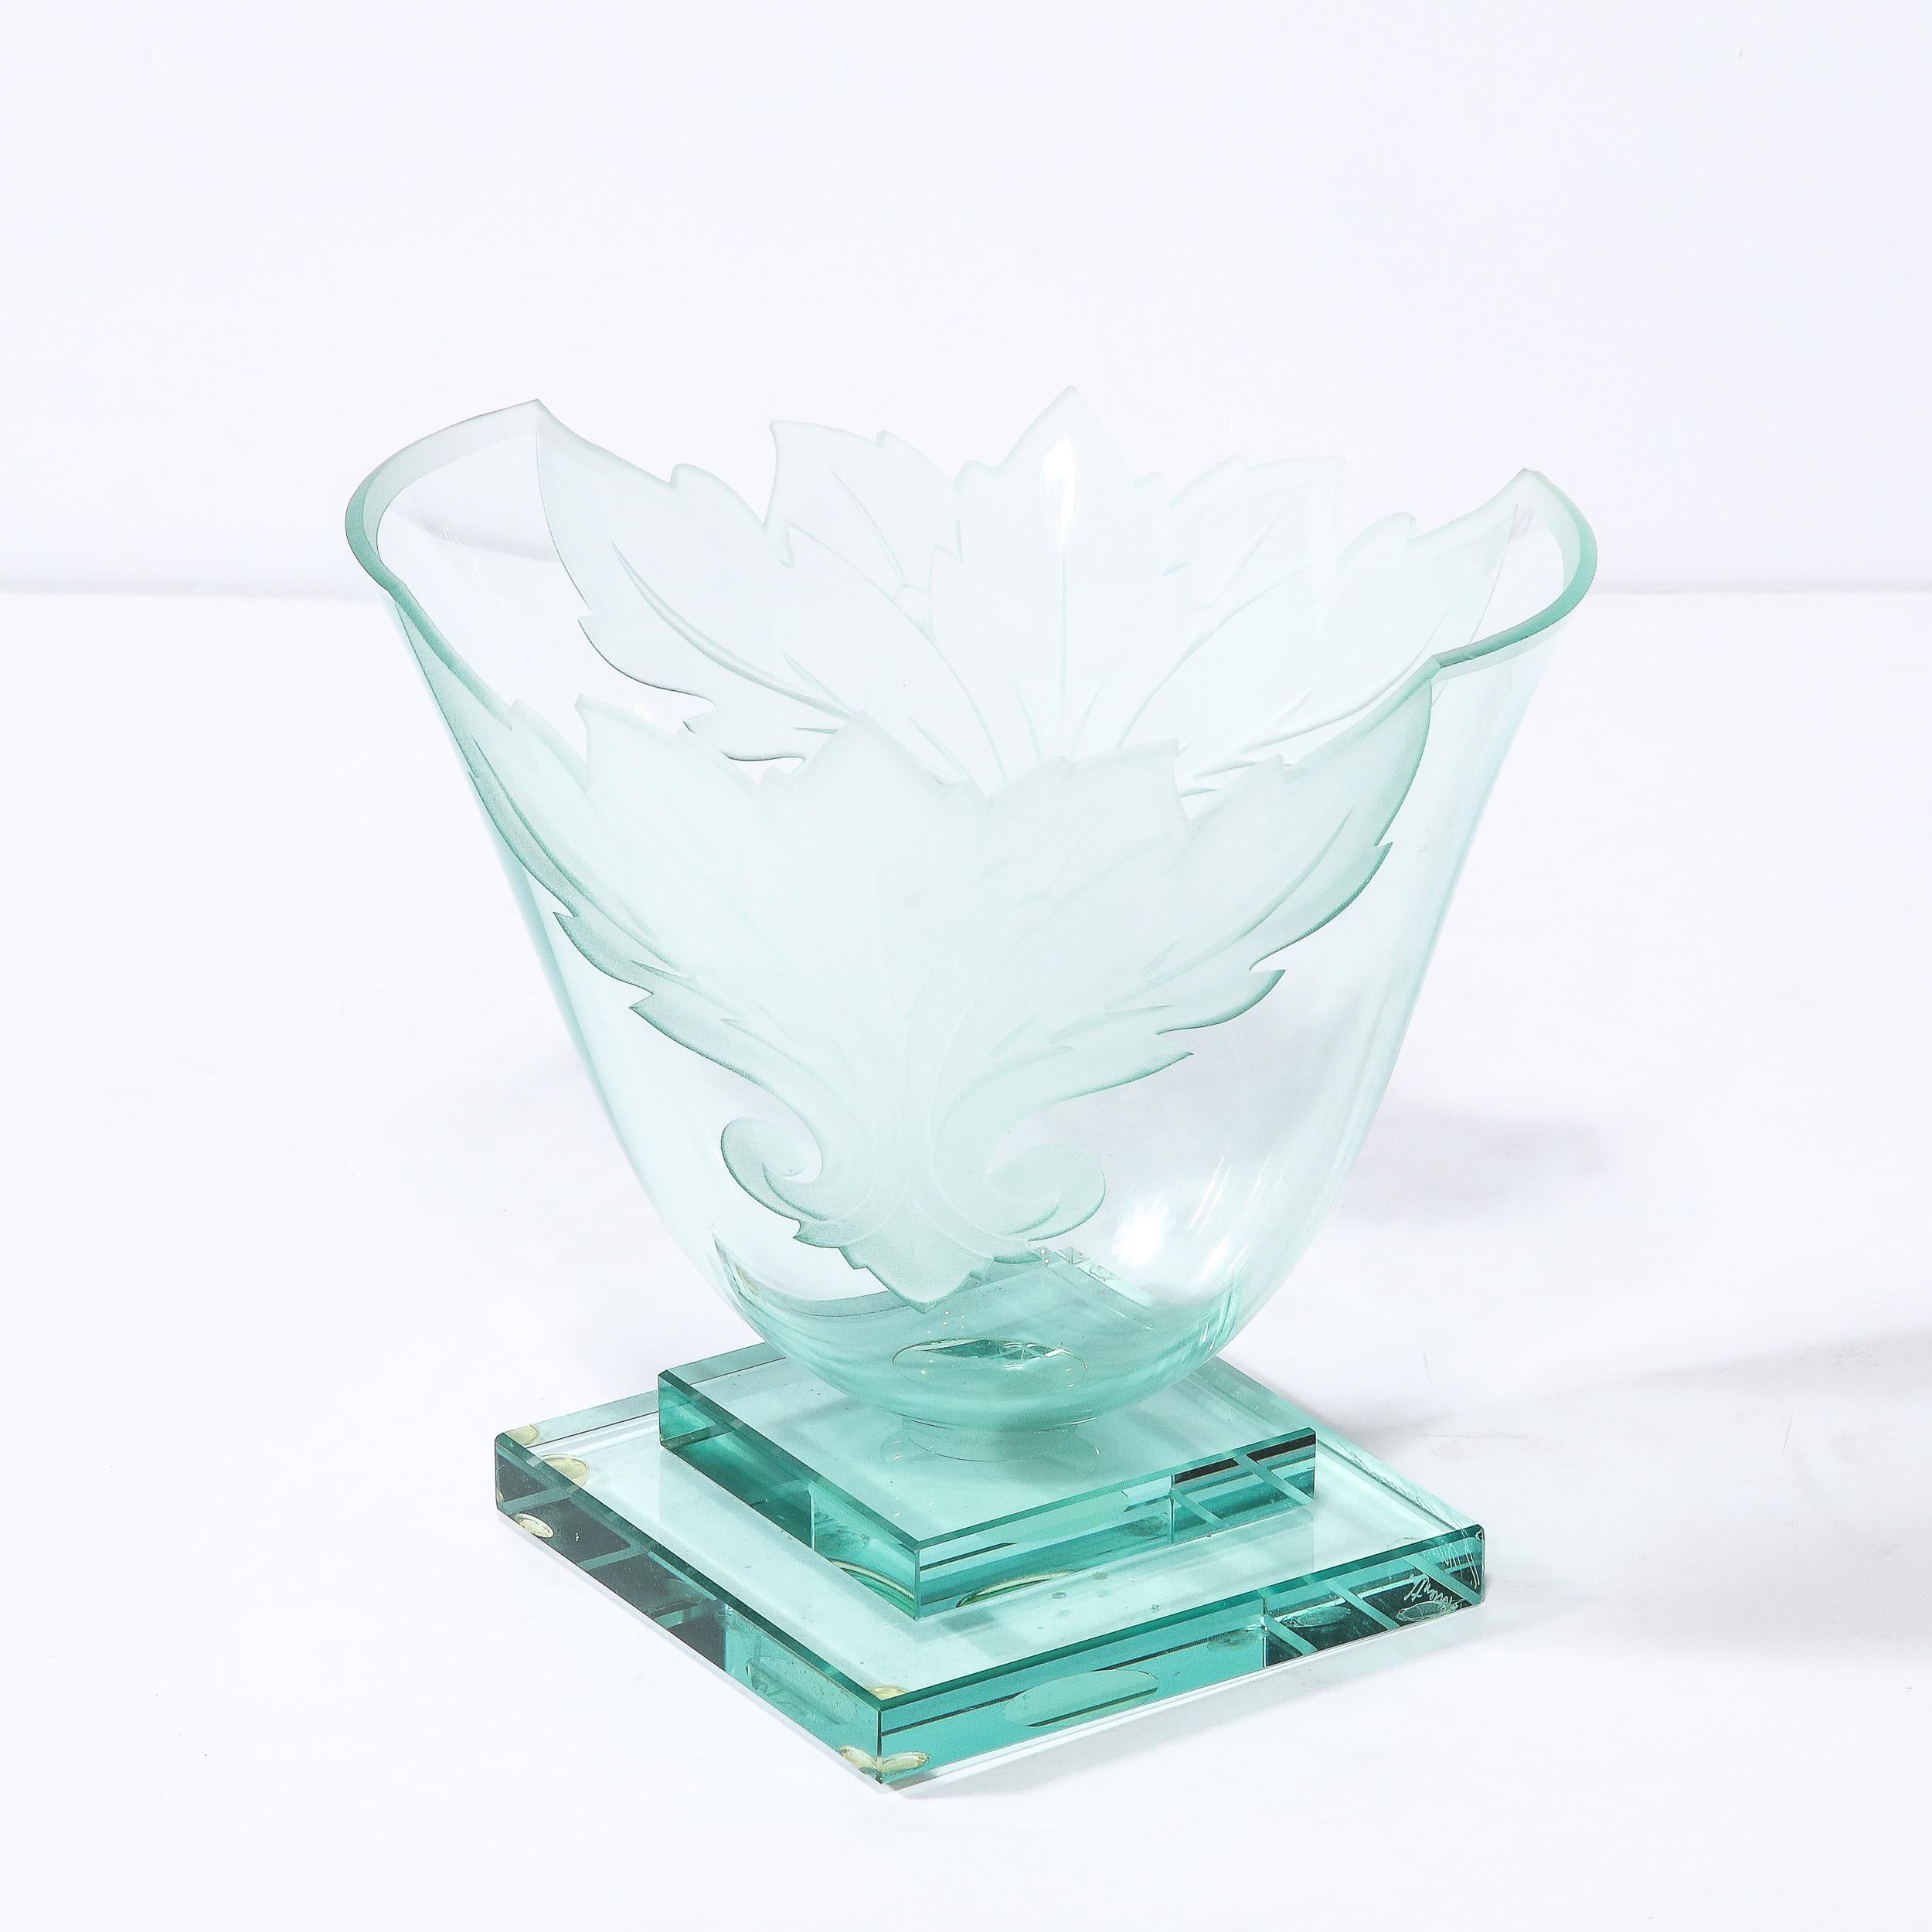 American Frosted and Etched Cut Glass Leaf Vase/Bowl on Geometric Base by Robert Guenther For Sale